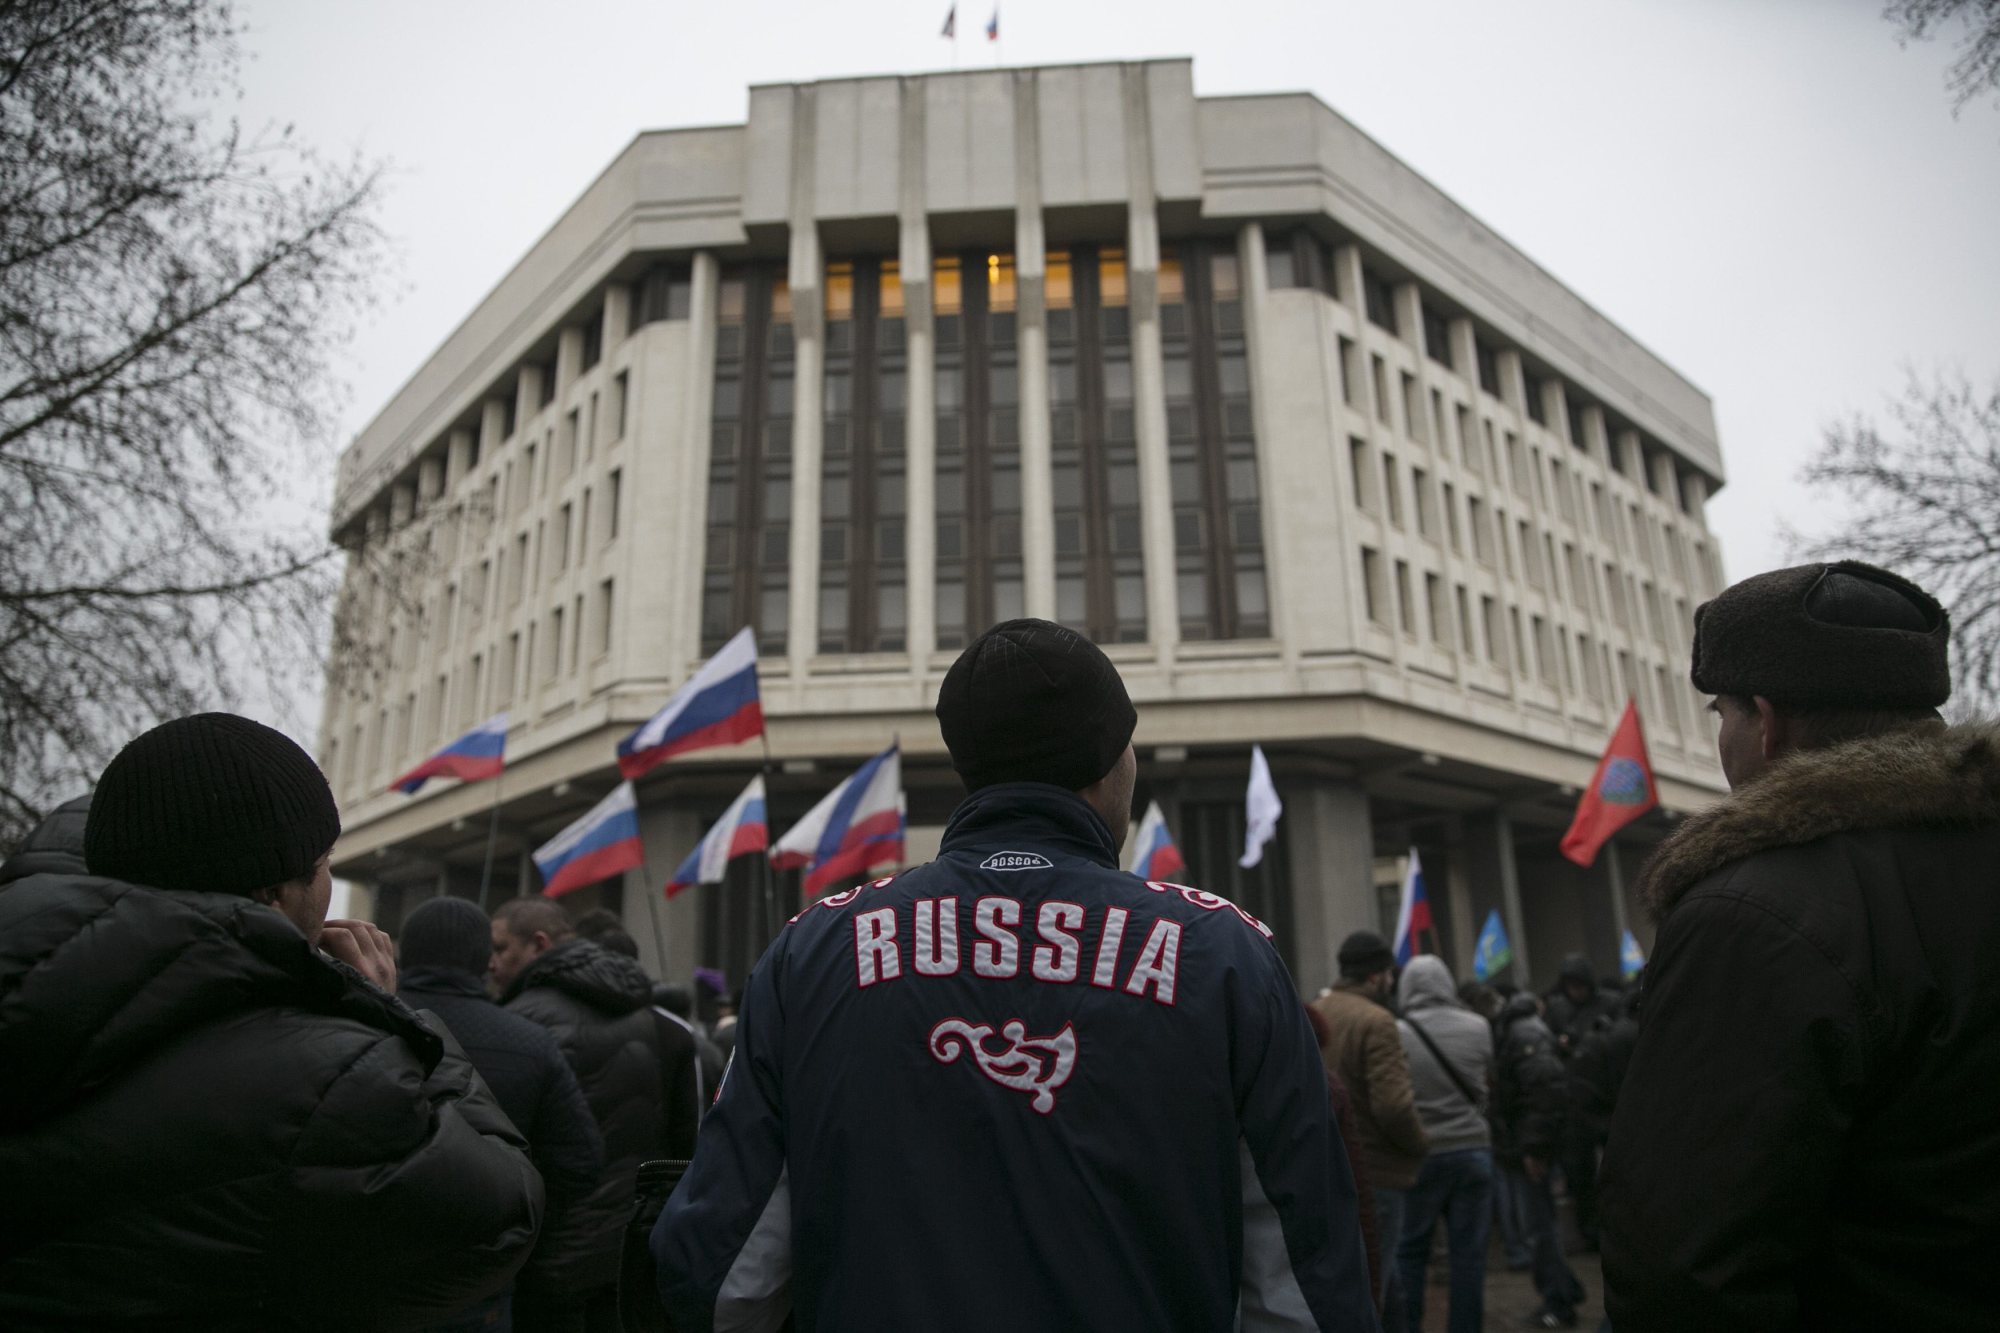 Men stand during a pro-Russian rally outside the Crimean parliament building in Simferopol, Feb. 27, 2014.